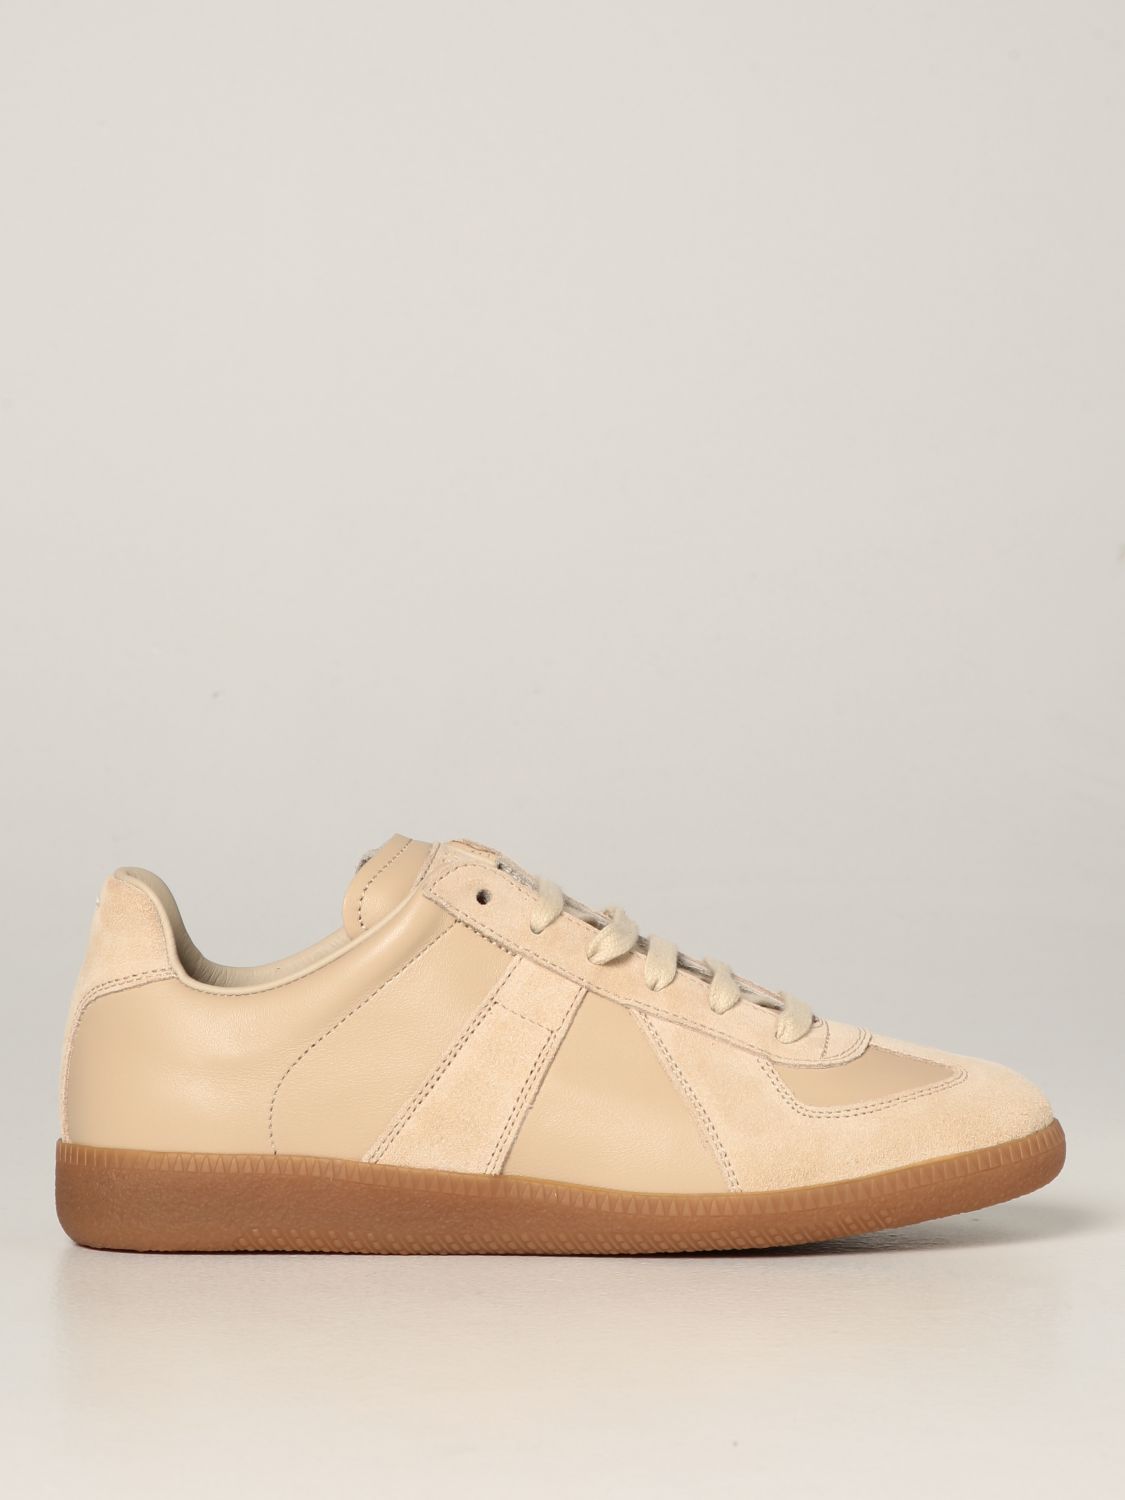 MAISON MARGIELA: Replica sneakers in leather and suede - Beige | Maison ...